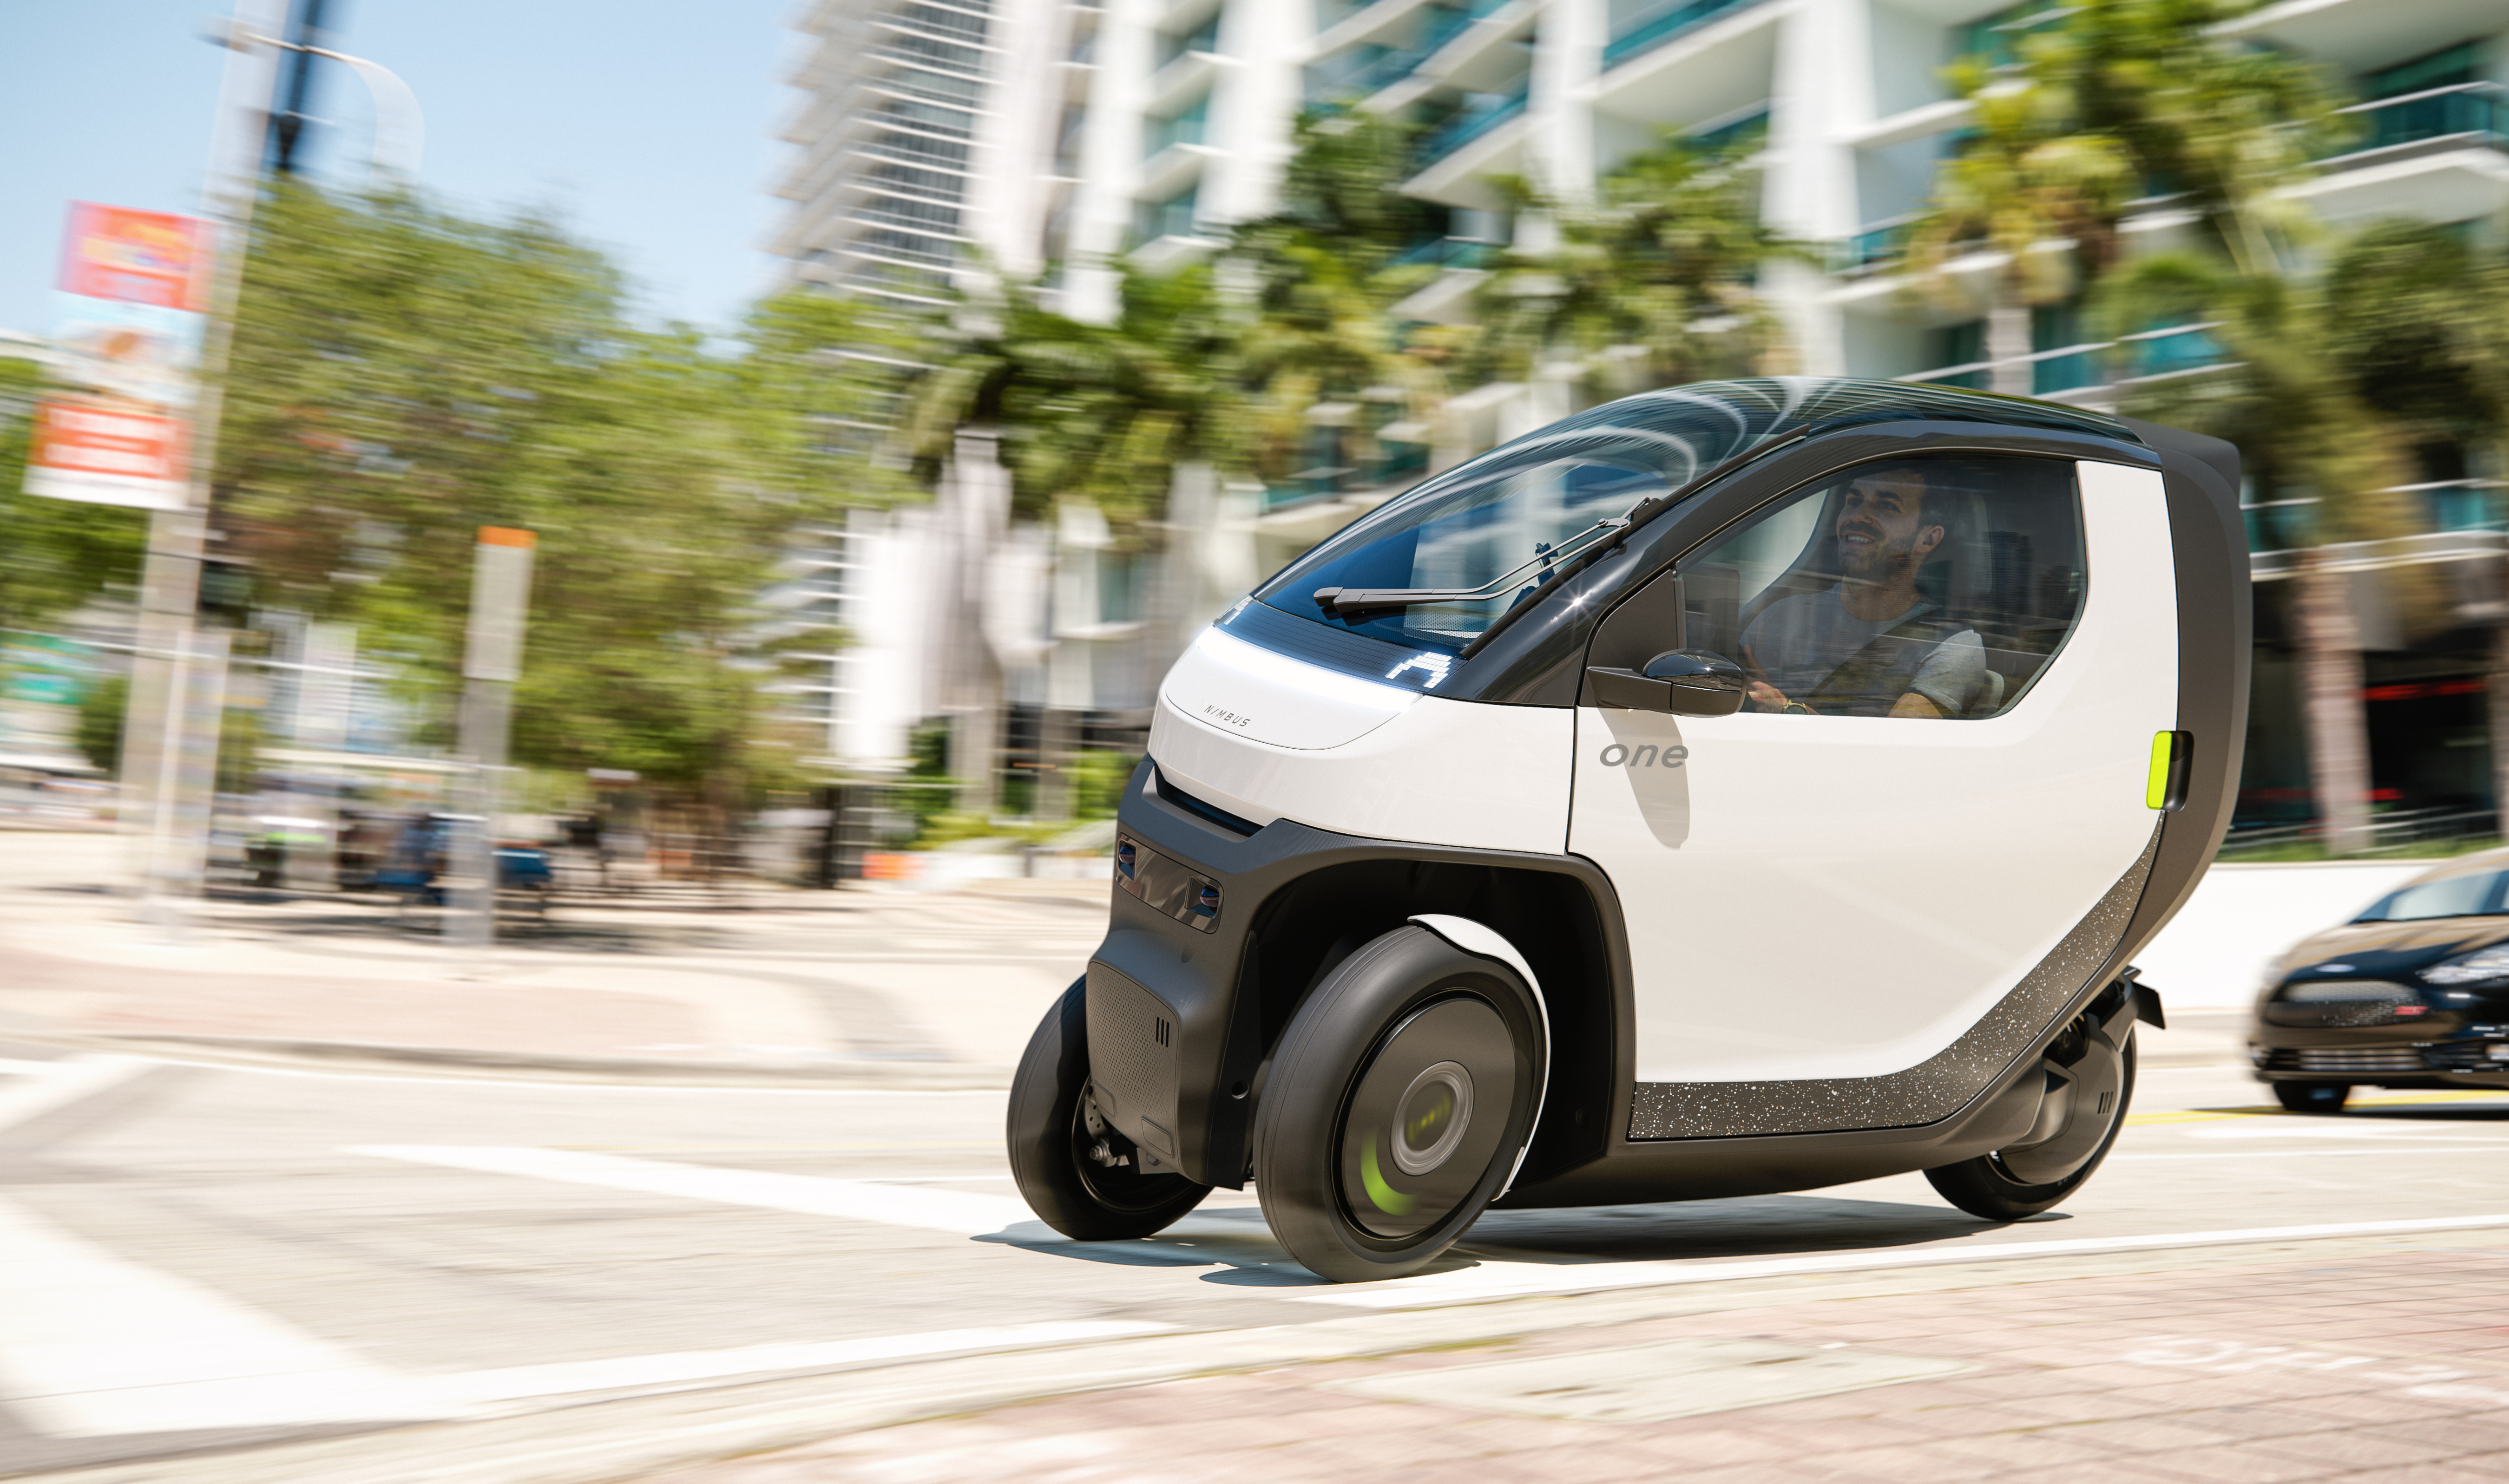 Nimbus One drives a small 3-wheeled EV incline in the city